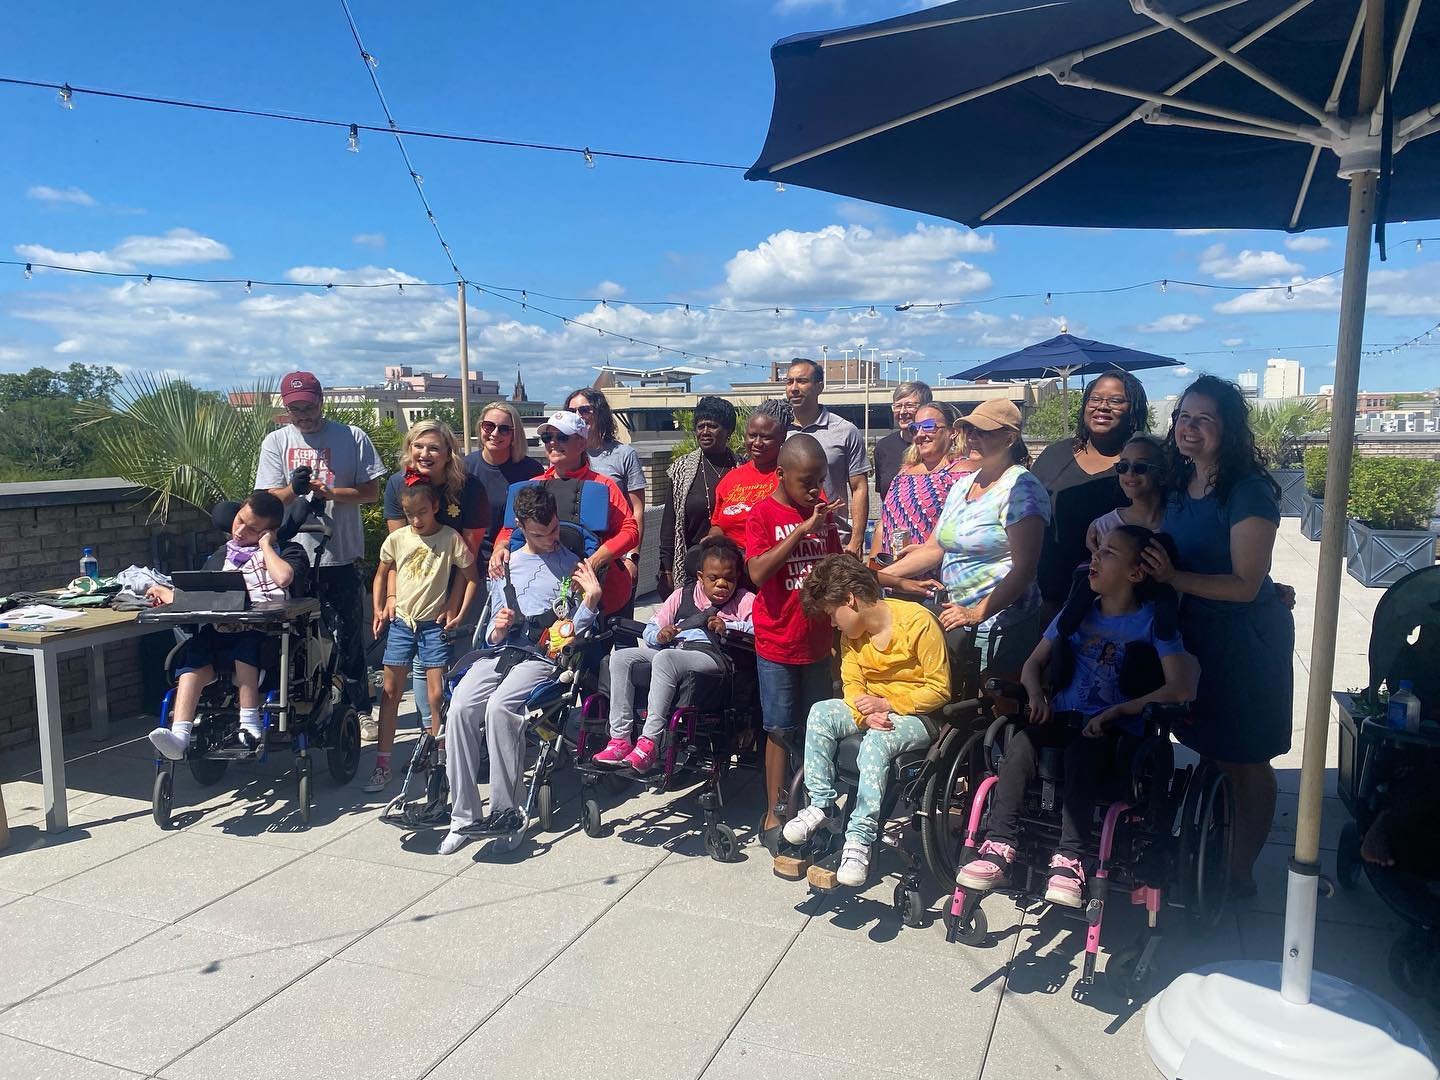 We had a great time @theloutrelcharleston with the kids from @pattisonsacademy planting the veggie/herb/flower garden on the rooftop!  The weather was perfect and our gardeners had a ball!! Thank you to all the volunteers who came out and helped!